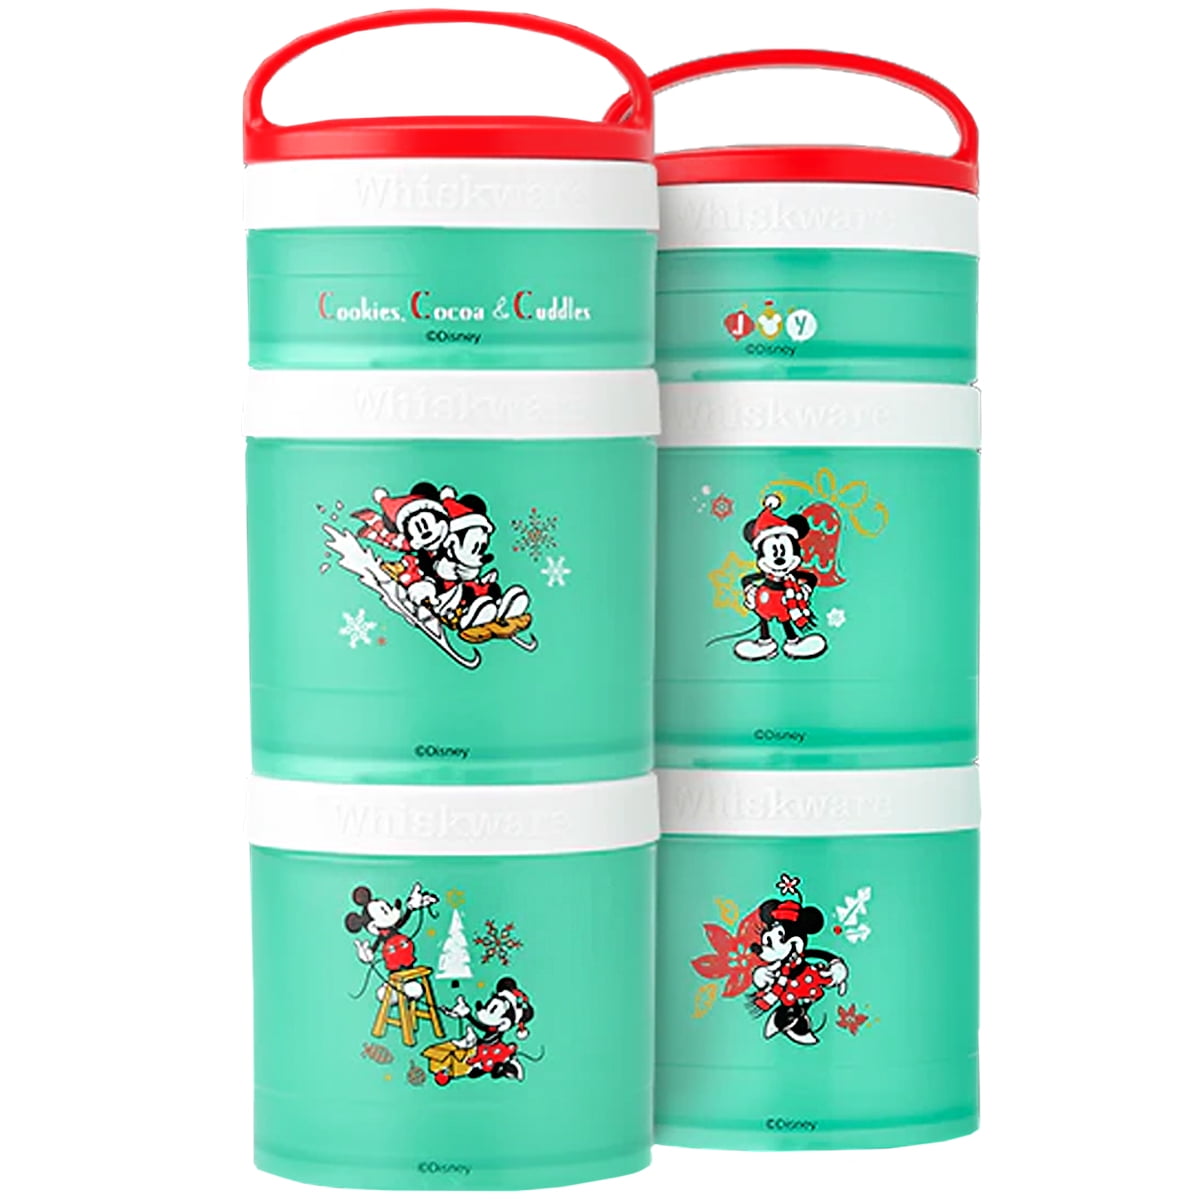 Whiskware Disney Pixar Stackable Snack Containers for Kids and Toddlers, 3  Stackable Snack Cups for …See more Whiskware Disney Pixar Stackable Snack